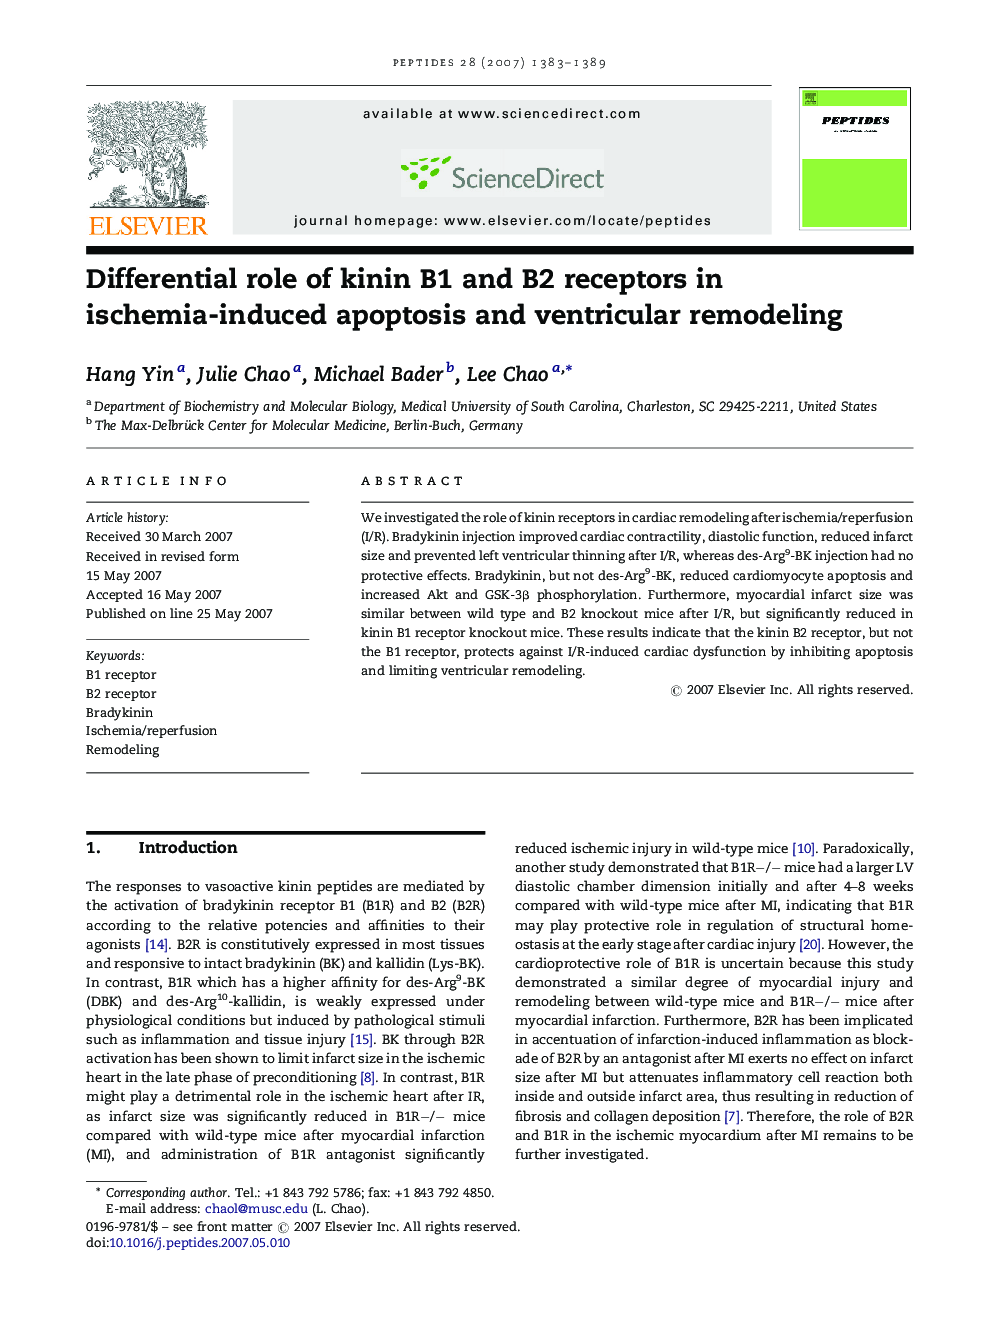 Differential role of kinin B1 and B2 receptors in ischemia-induced apoptosis and ventricular remodeling